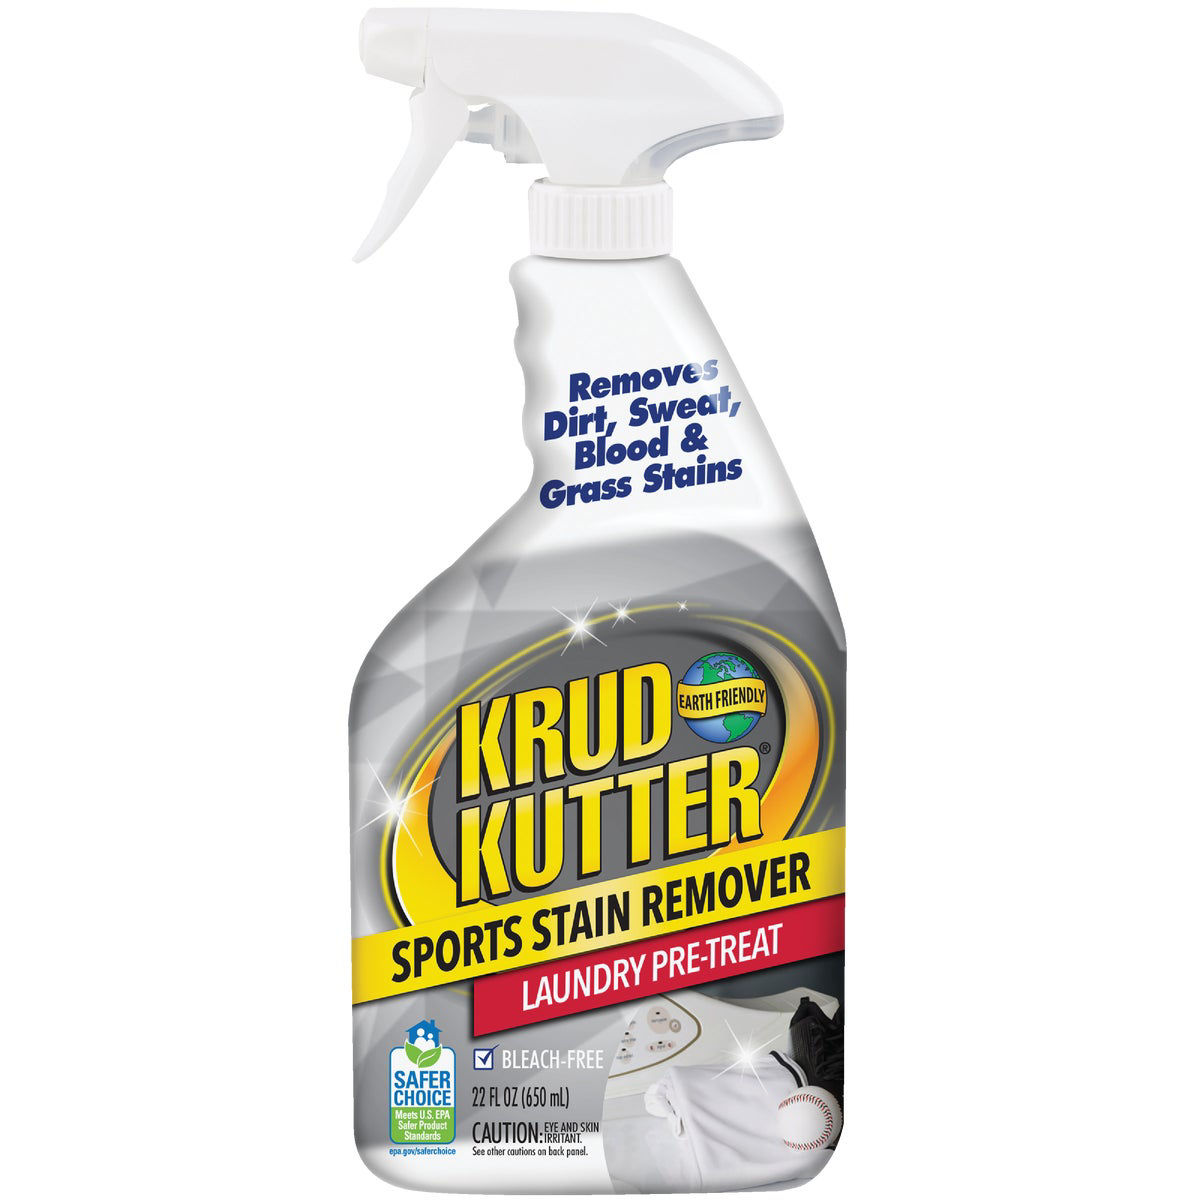 Krud Kutter 22 Oz. Sports Stain Remover Laundry Pre- Treat